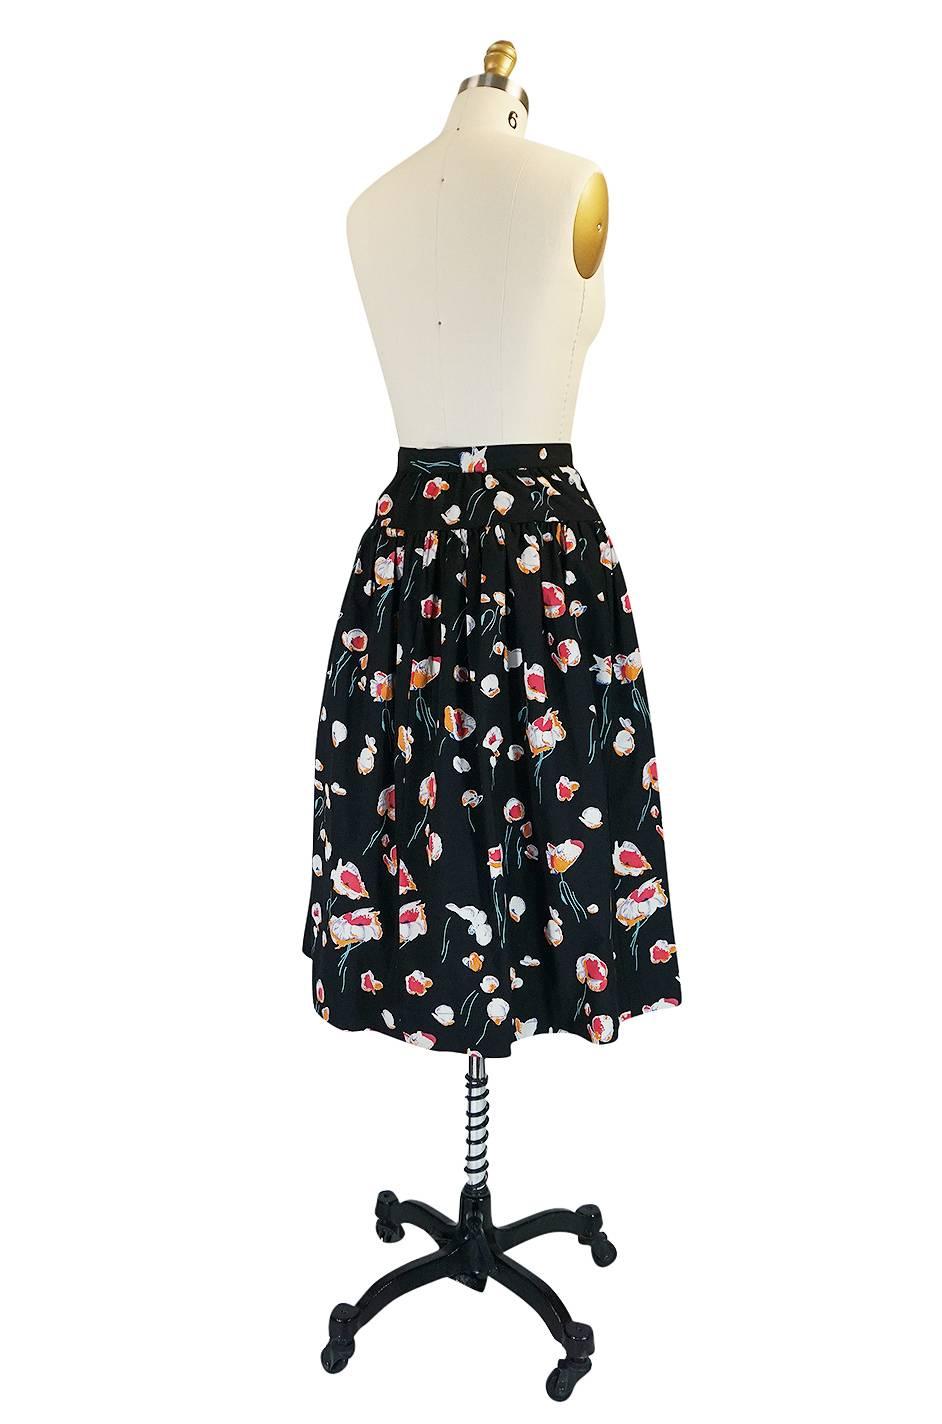 I love this fuller skirt by Yves Saint Laurent with its fifties feel and gorgeous floral print. It is made of a crisp cotton that has been printed with one of Yves signature prints. The waist cinches in and below that the skirt has a fabulous